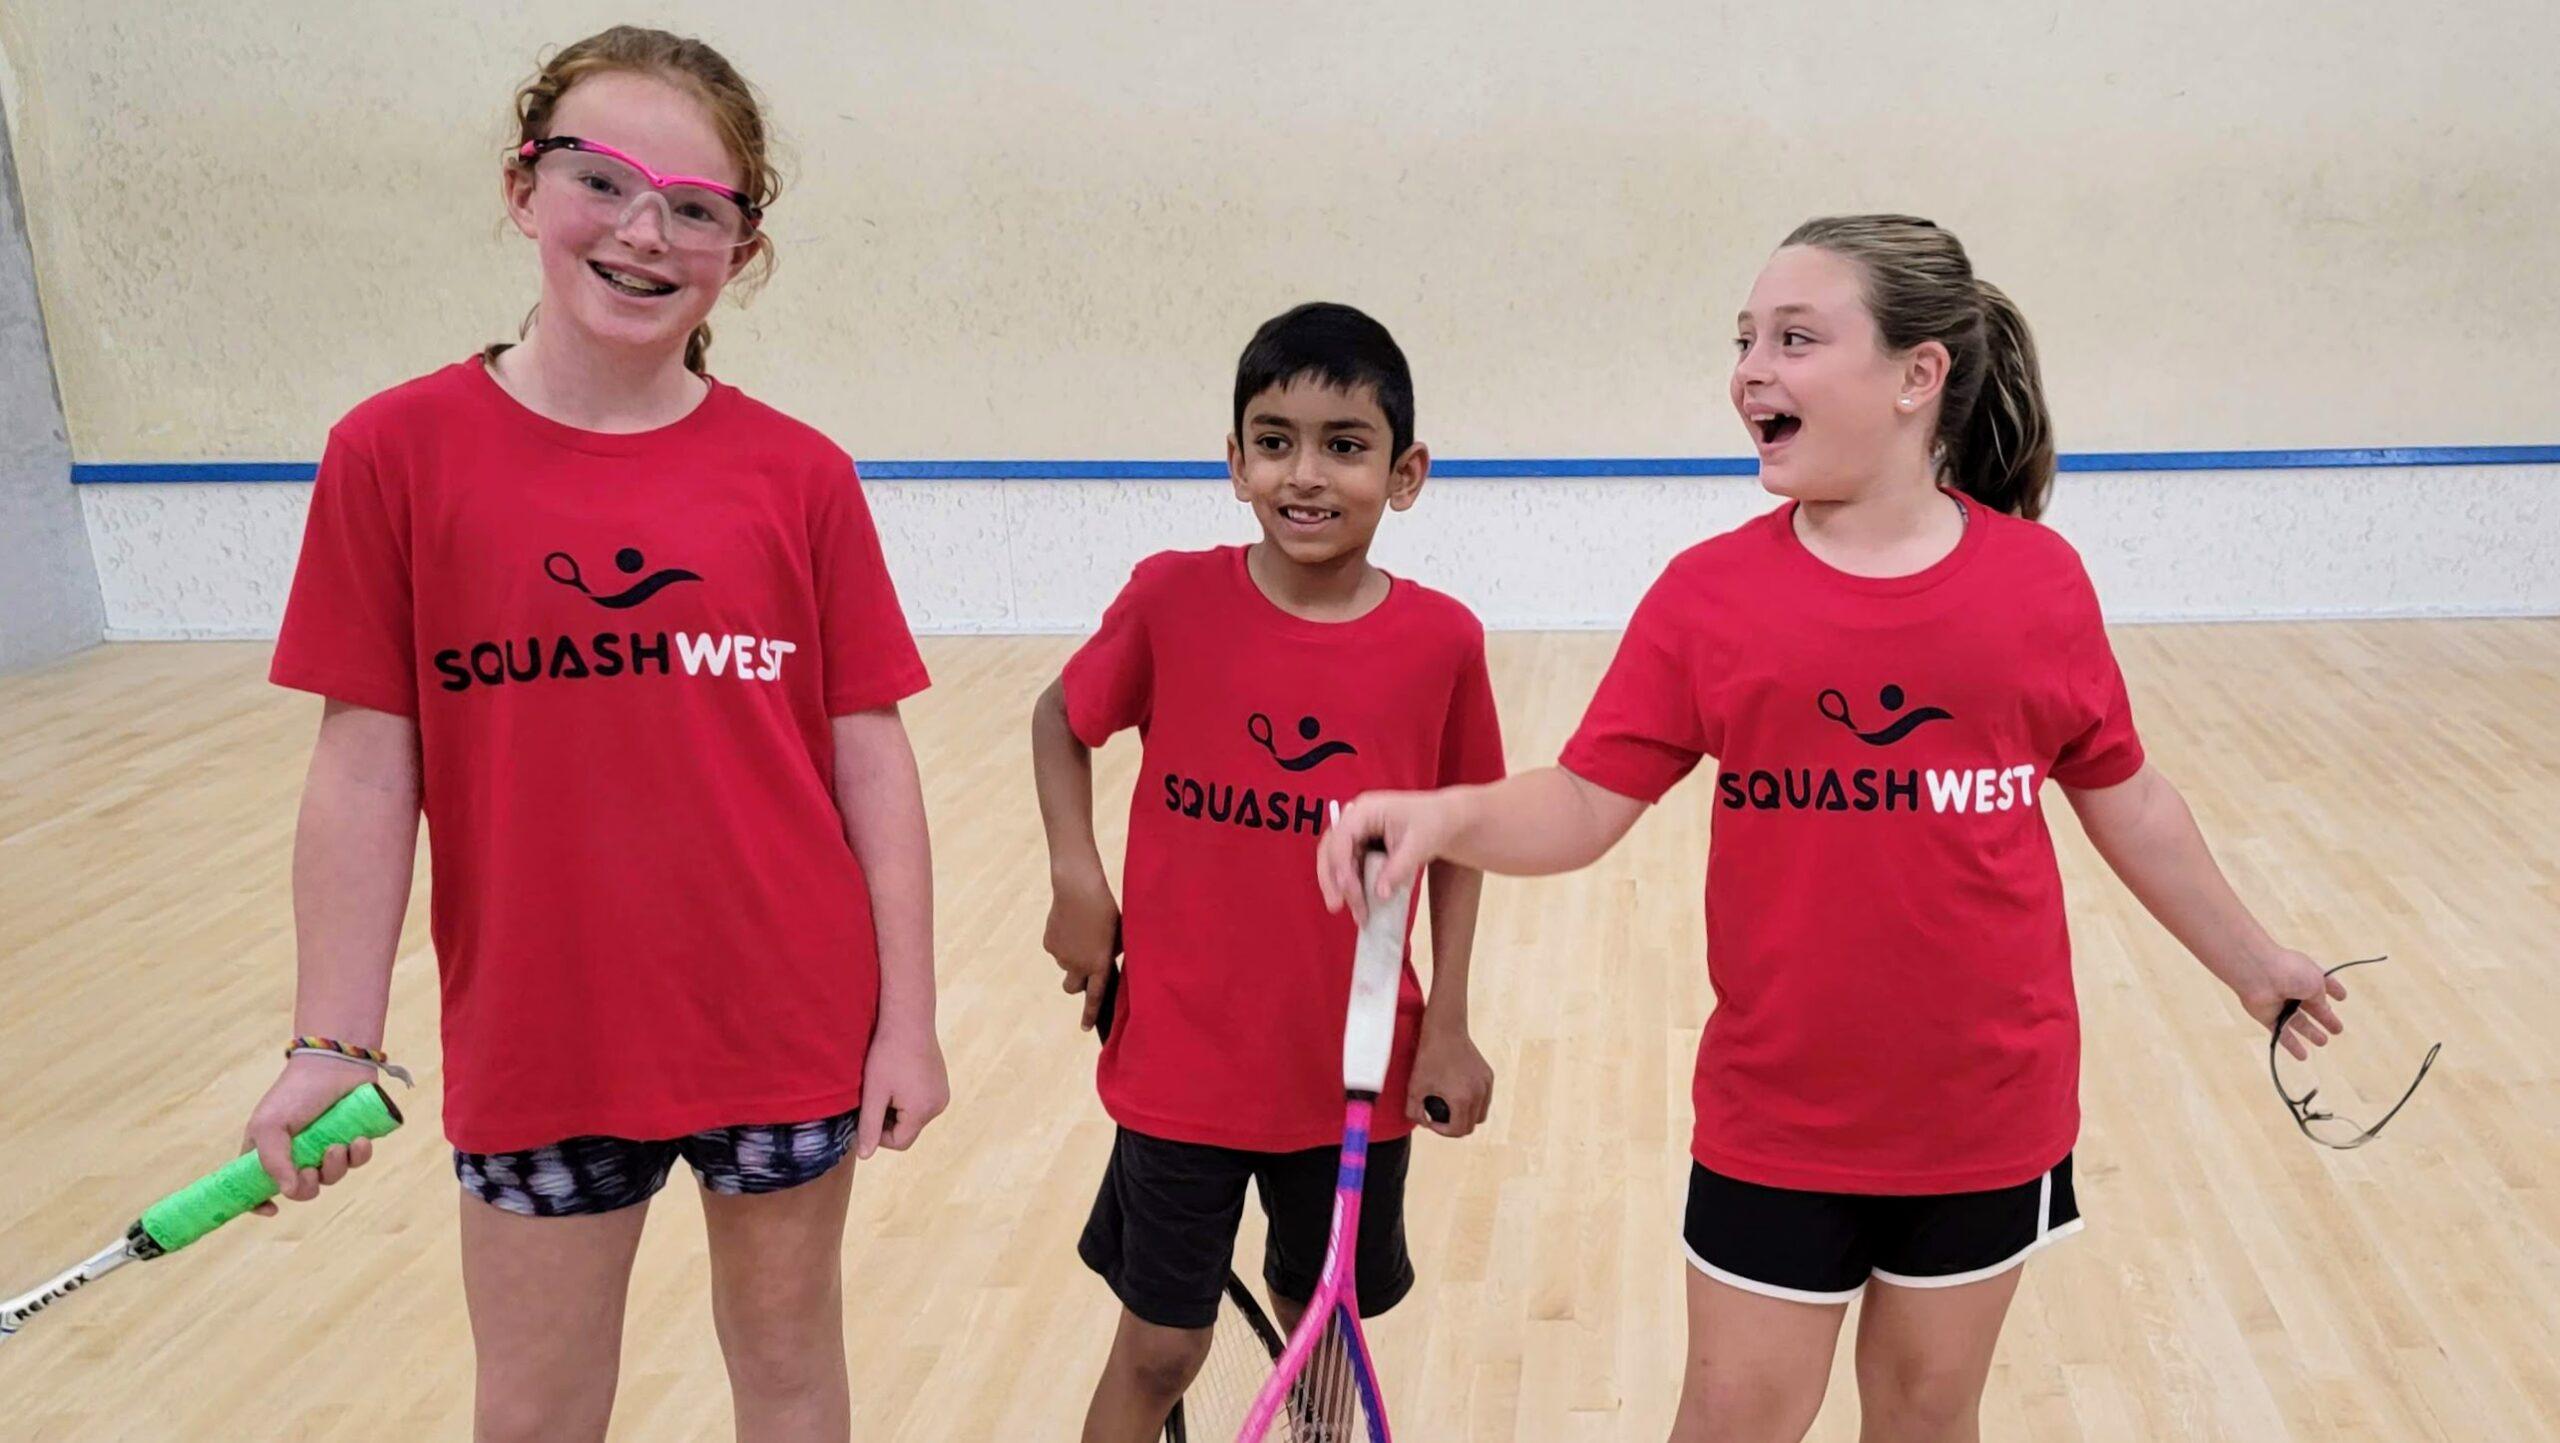 squash kids in red shirts